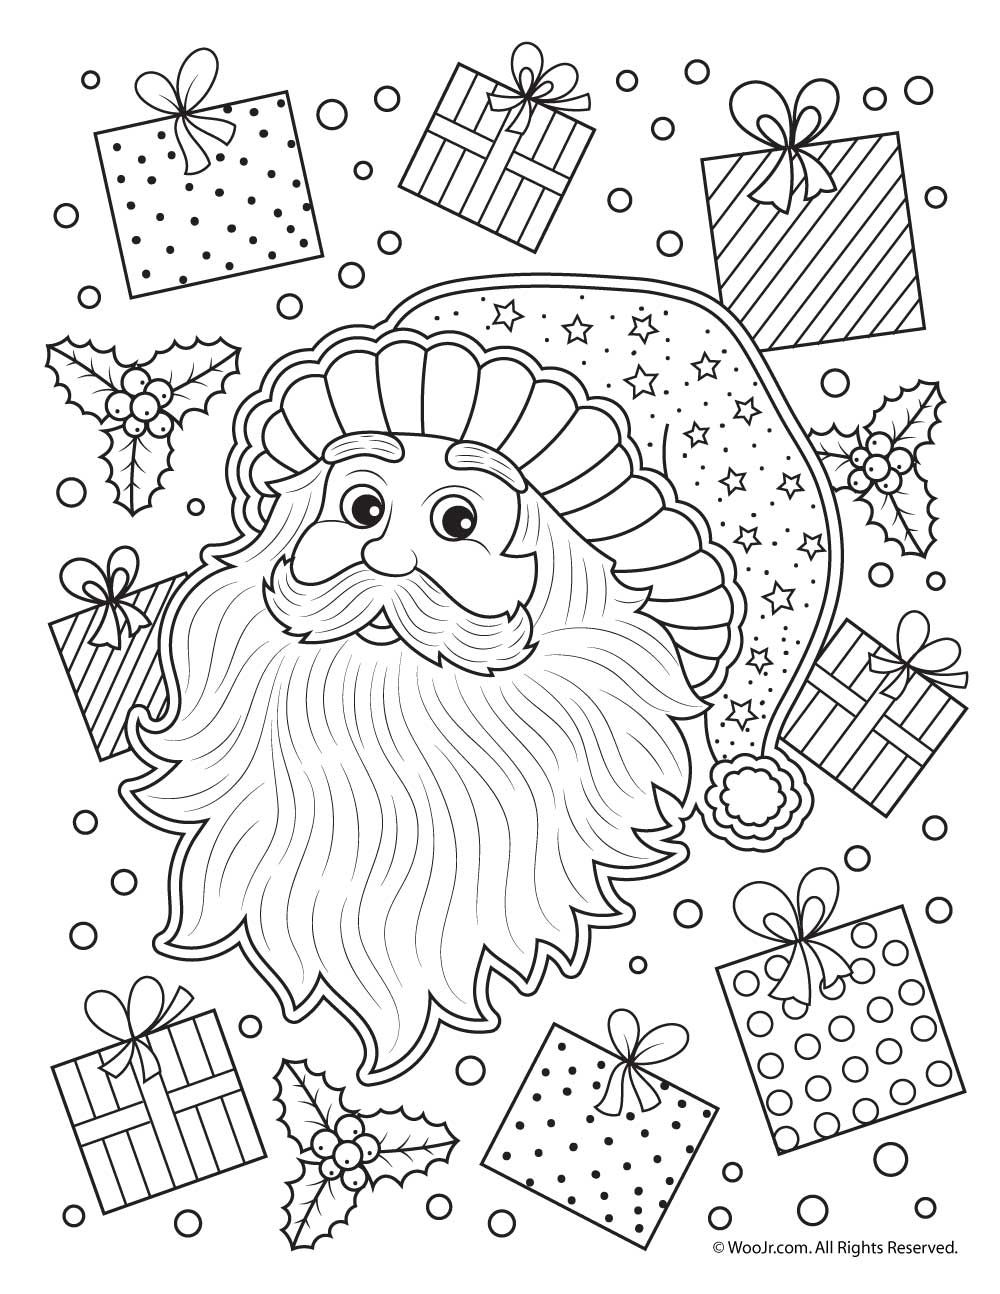 Santa claus adult coloring pages woo jr kids activities childrens publishing free christmas coloring pages christmas colors coloring pages for kids